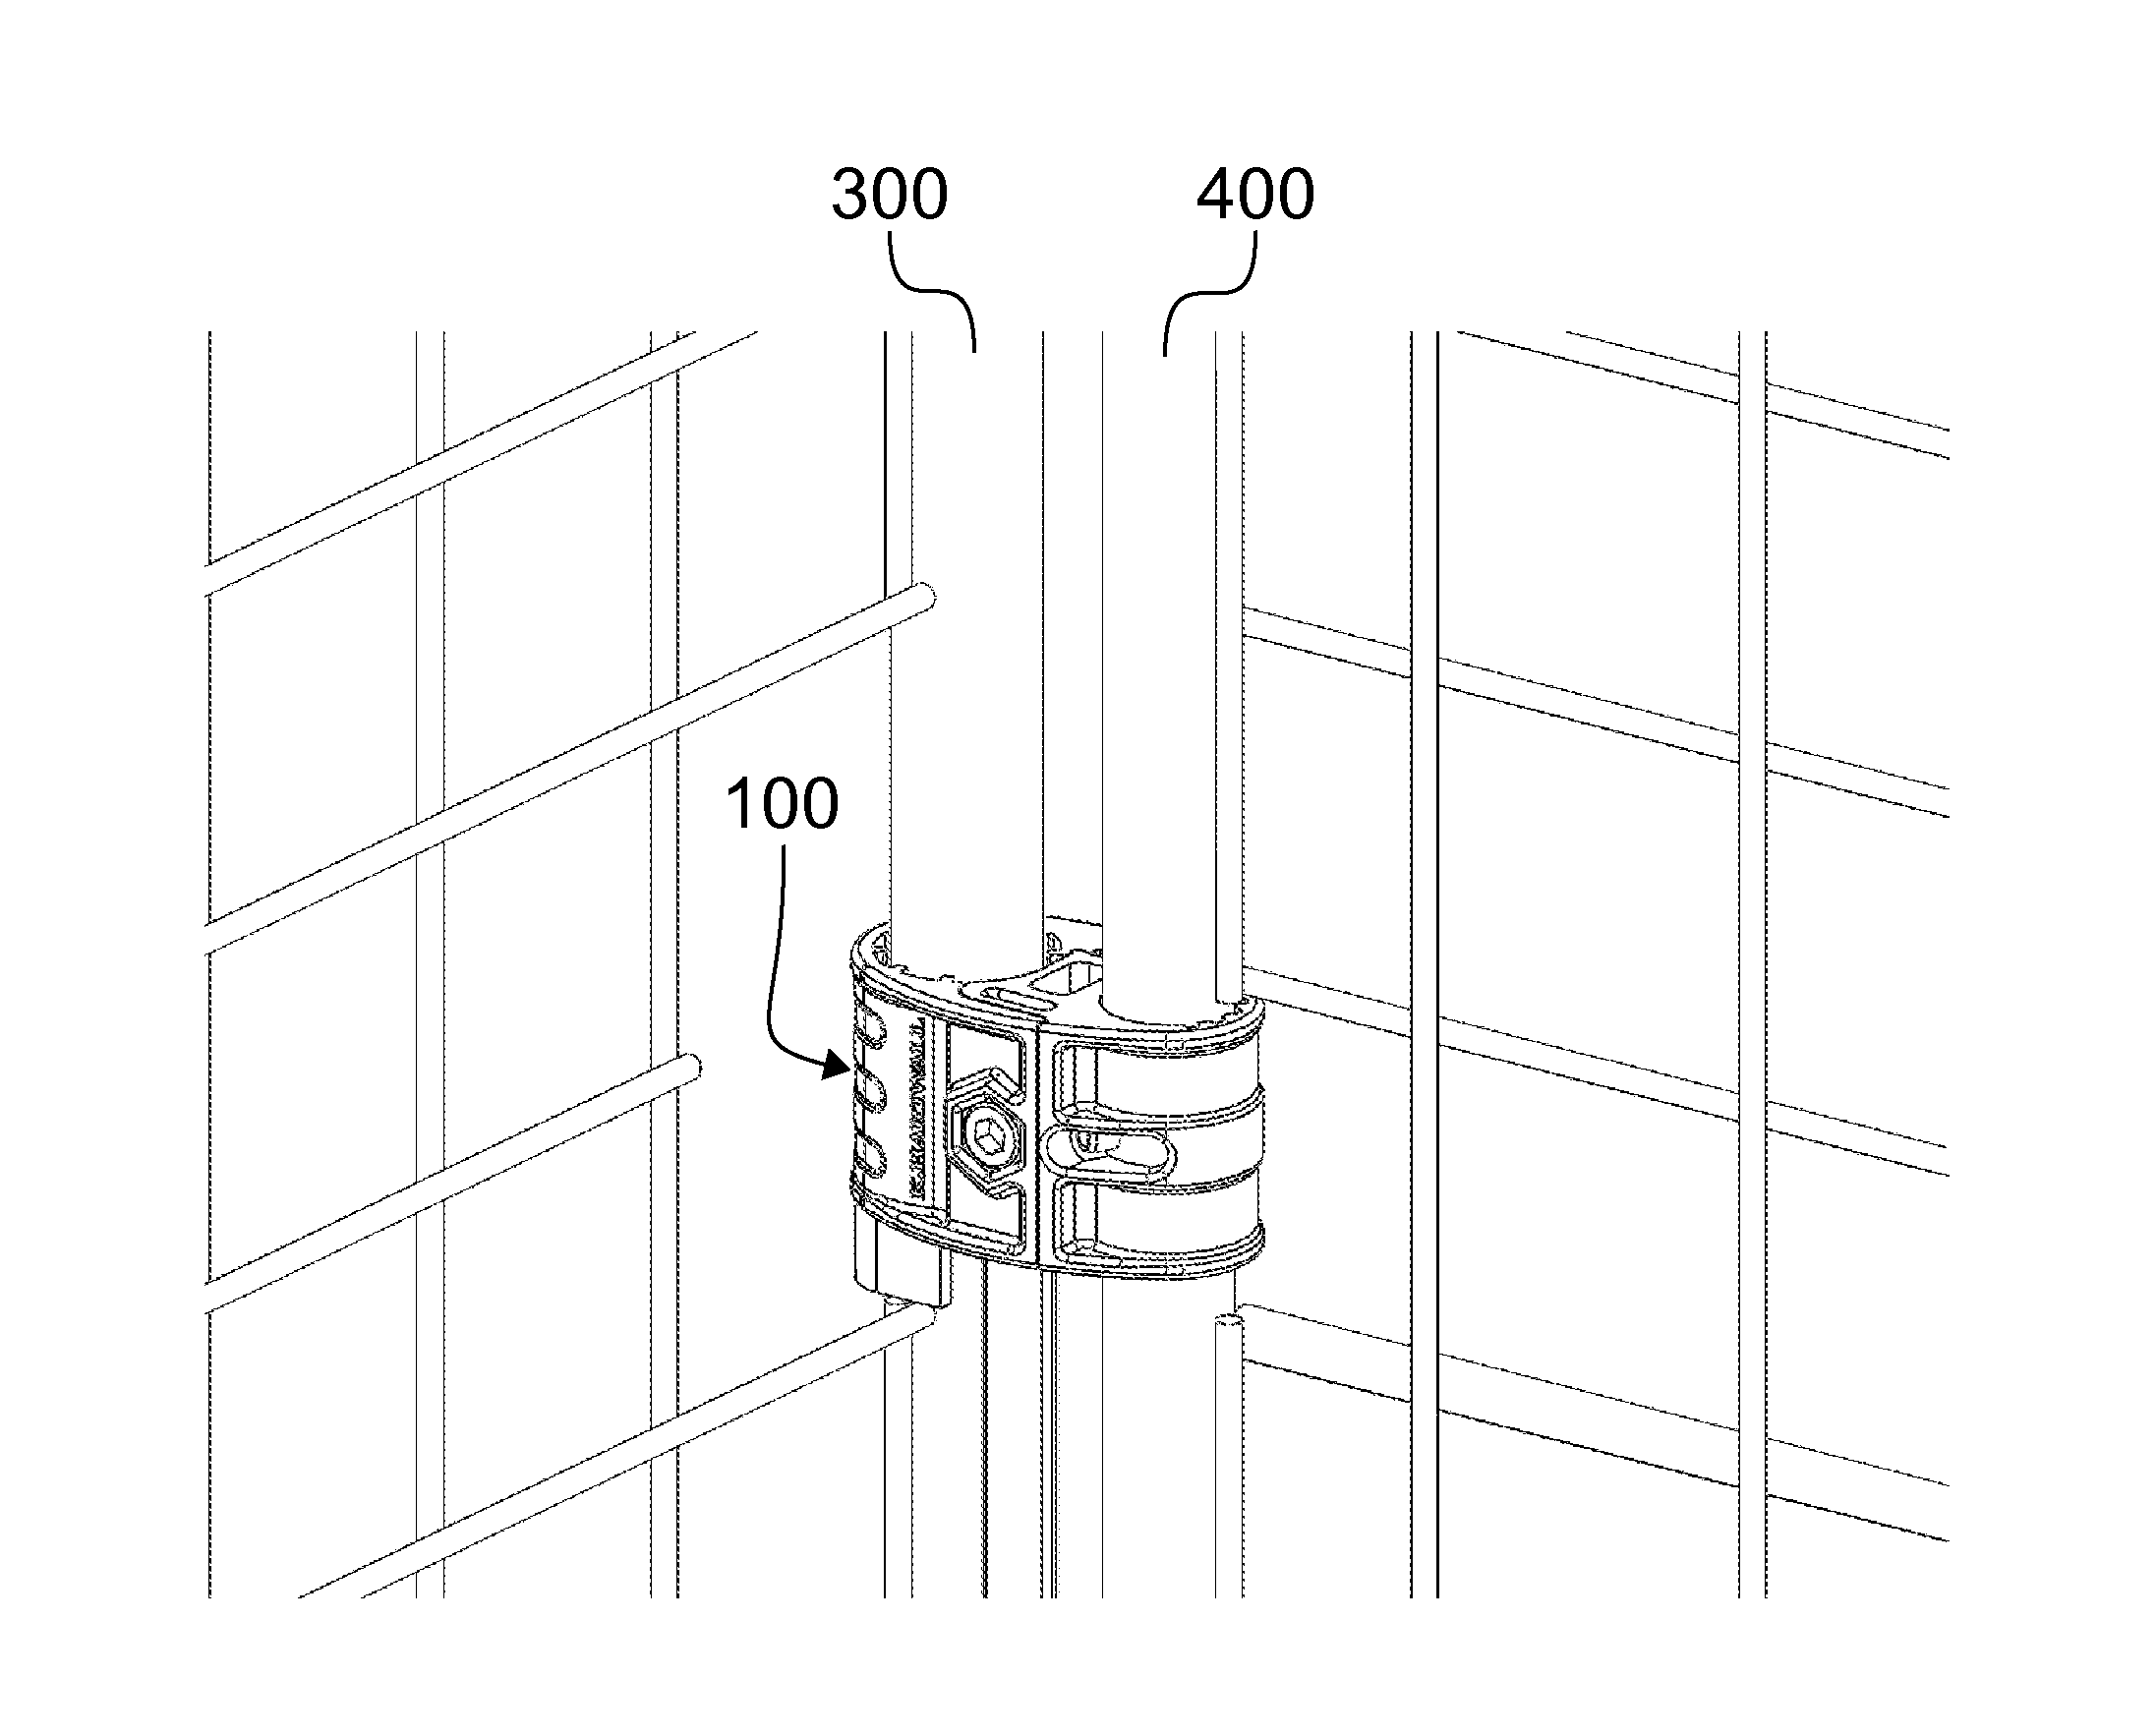 One-piece hinge body and hinge assembly for pivoting elements